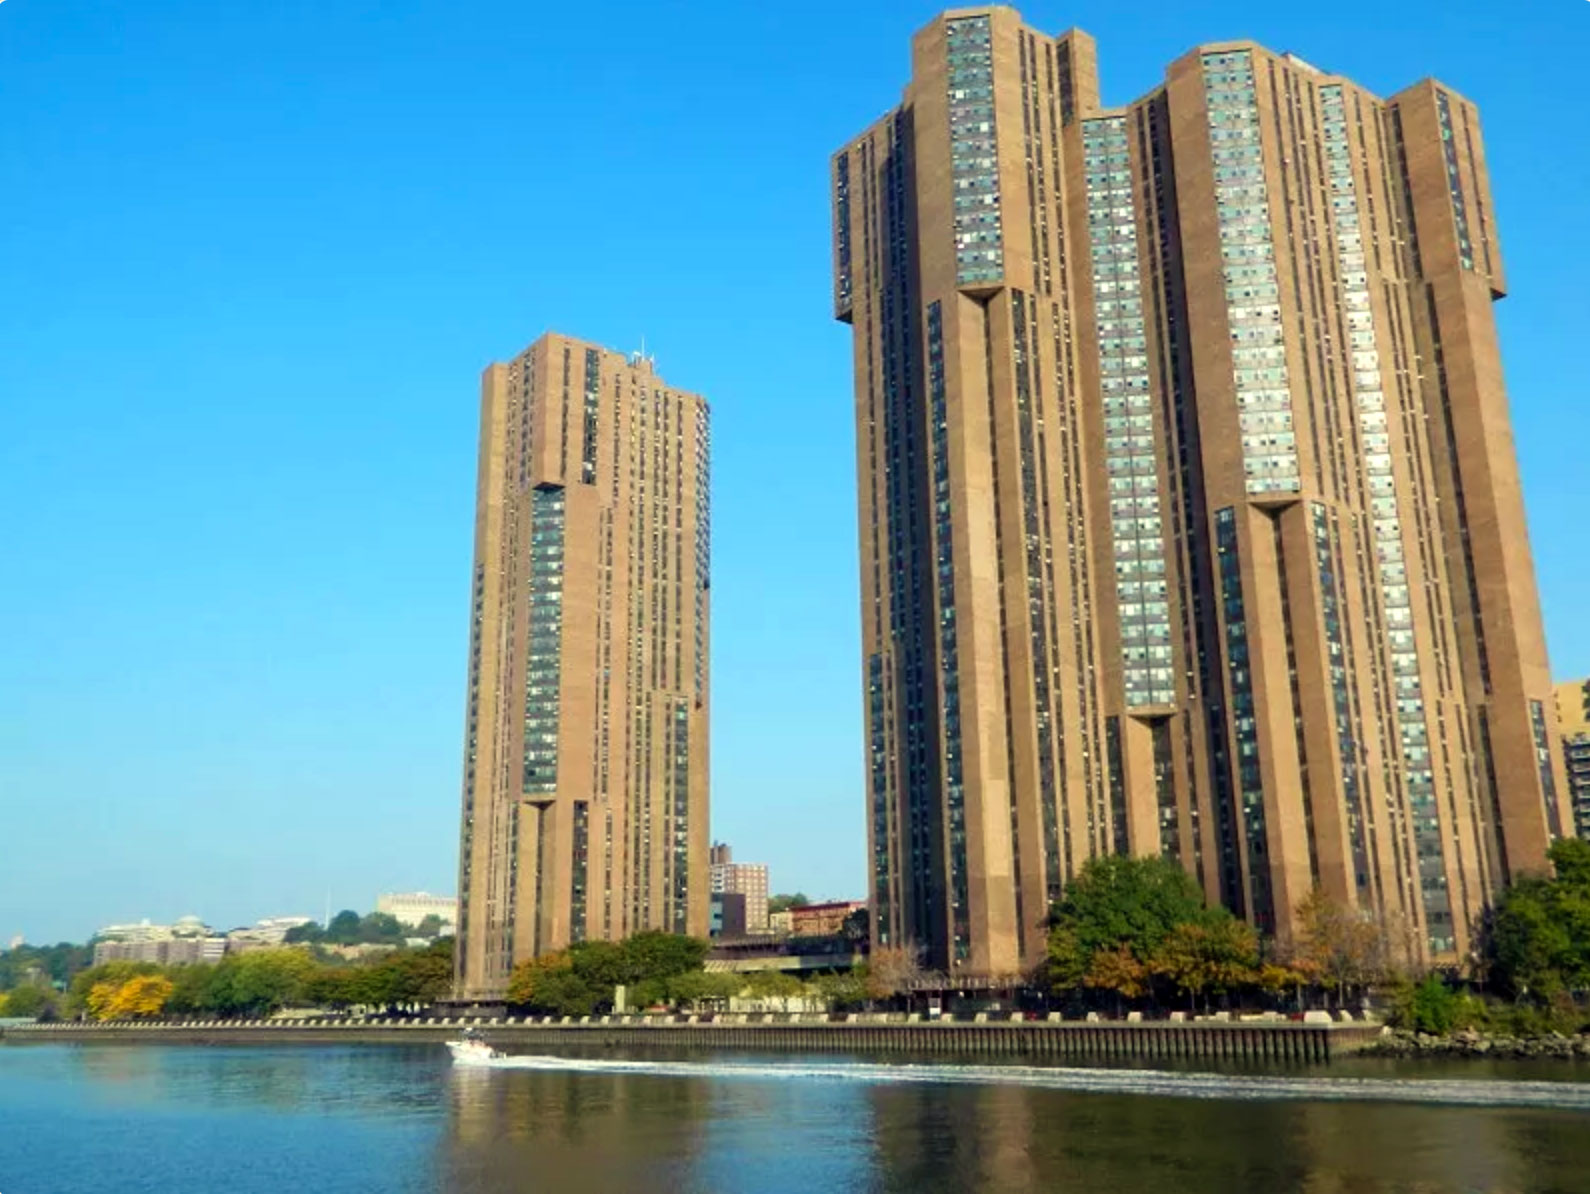 A photo of River Park Towers in Bronx New York as seen from the East River.